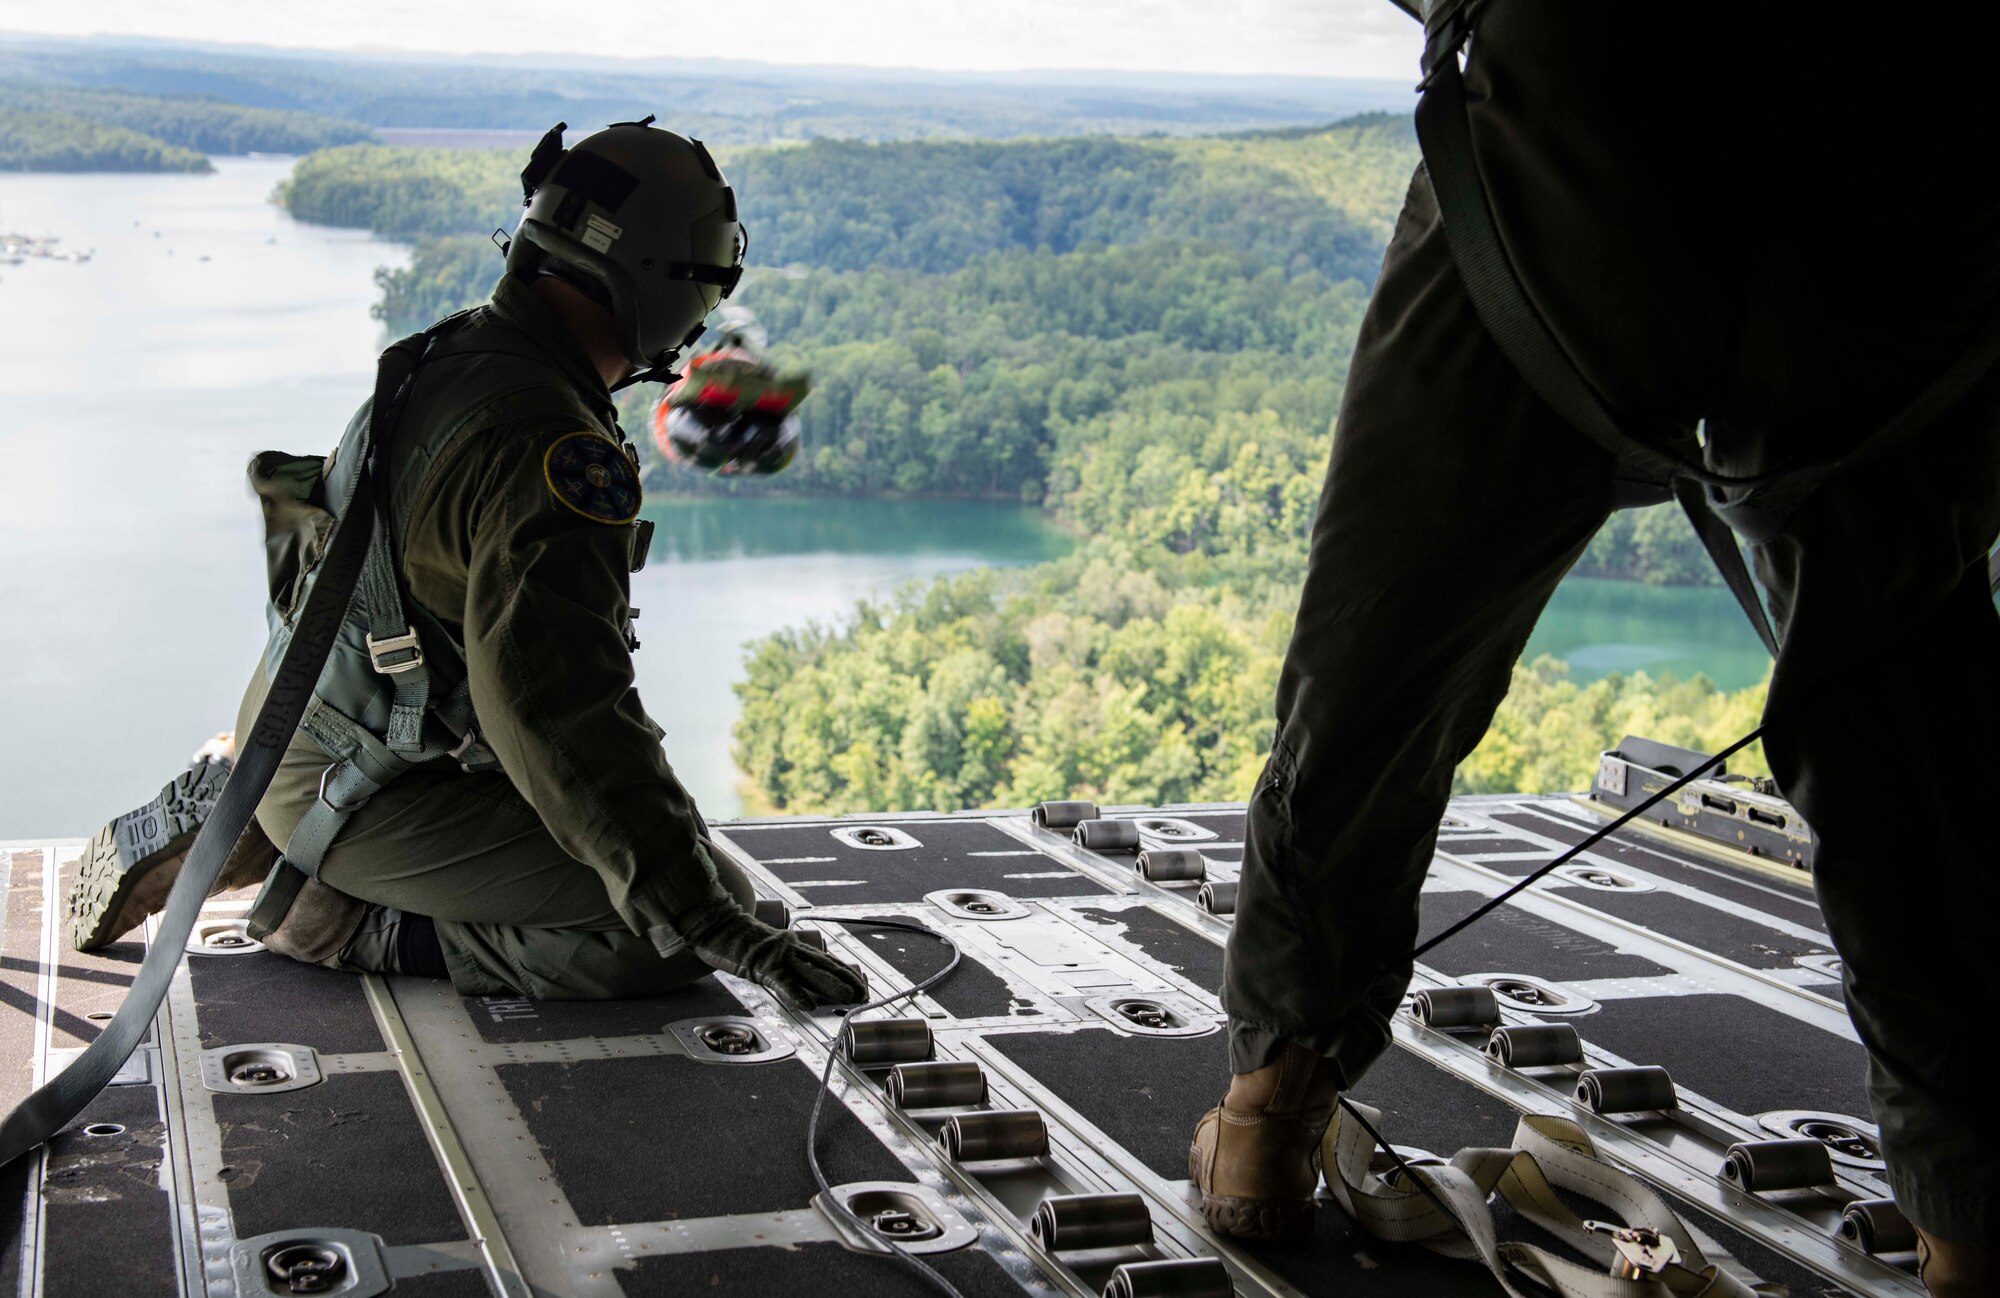 Air Force Reserve loadmasters watch cargo descend toward a drop zone after it is pushed out of the back of a C-130J Super Hercules near Charleston, W. Va., Aug. 23, 2020. Eight C-130s and Reserve and Guard partners converge to participate in a week-long training event. The exercise was designed to test the abilities of Air Force Reserve units to execute rapid global mobility missions in challenging, contested scenarios. (U.S. Air Force Reserve photo by Senior Airman Nathan Byrnes)